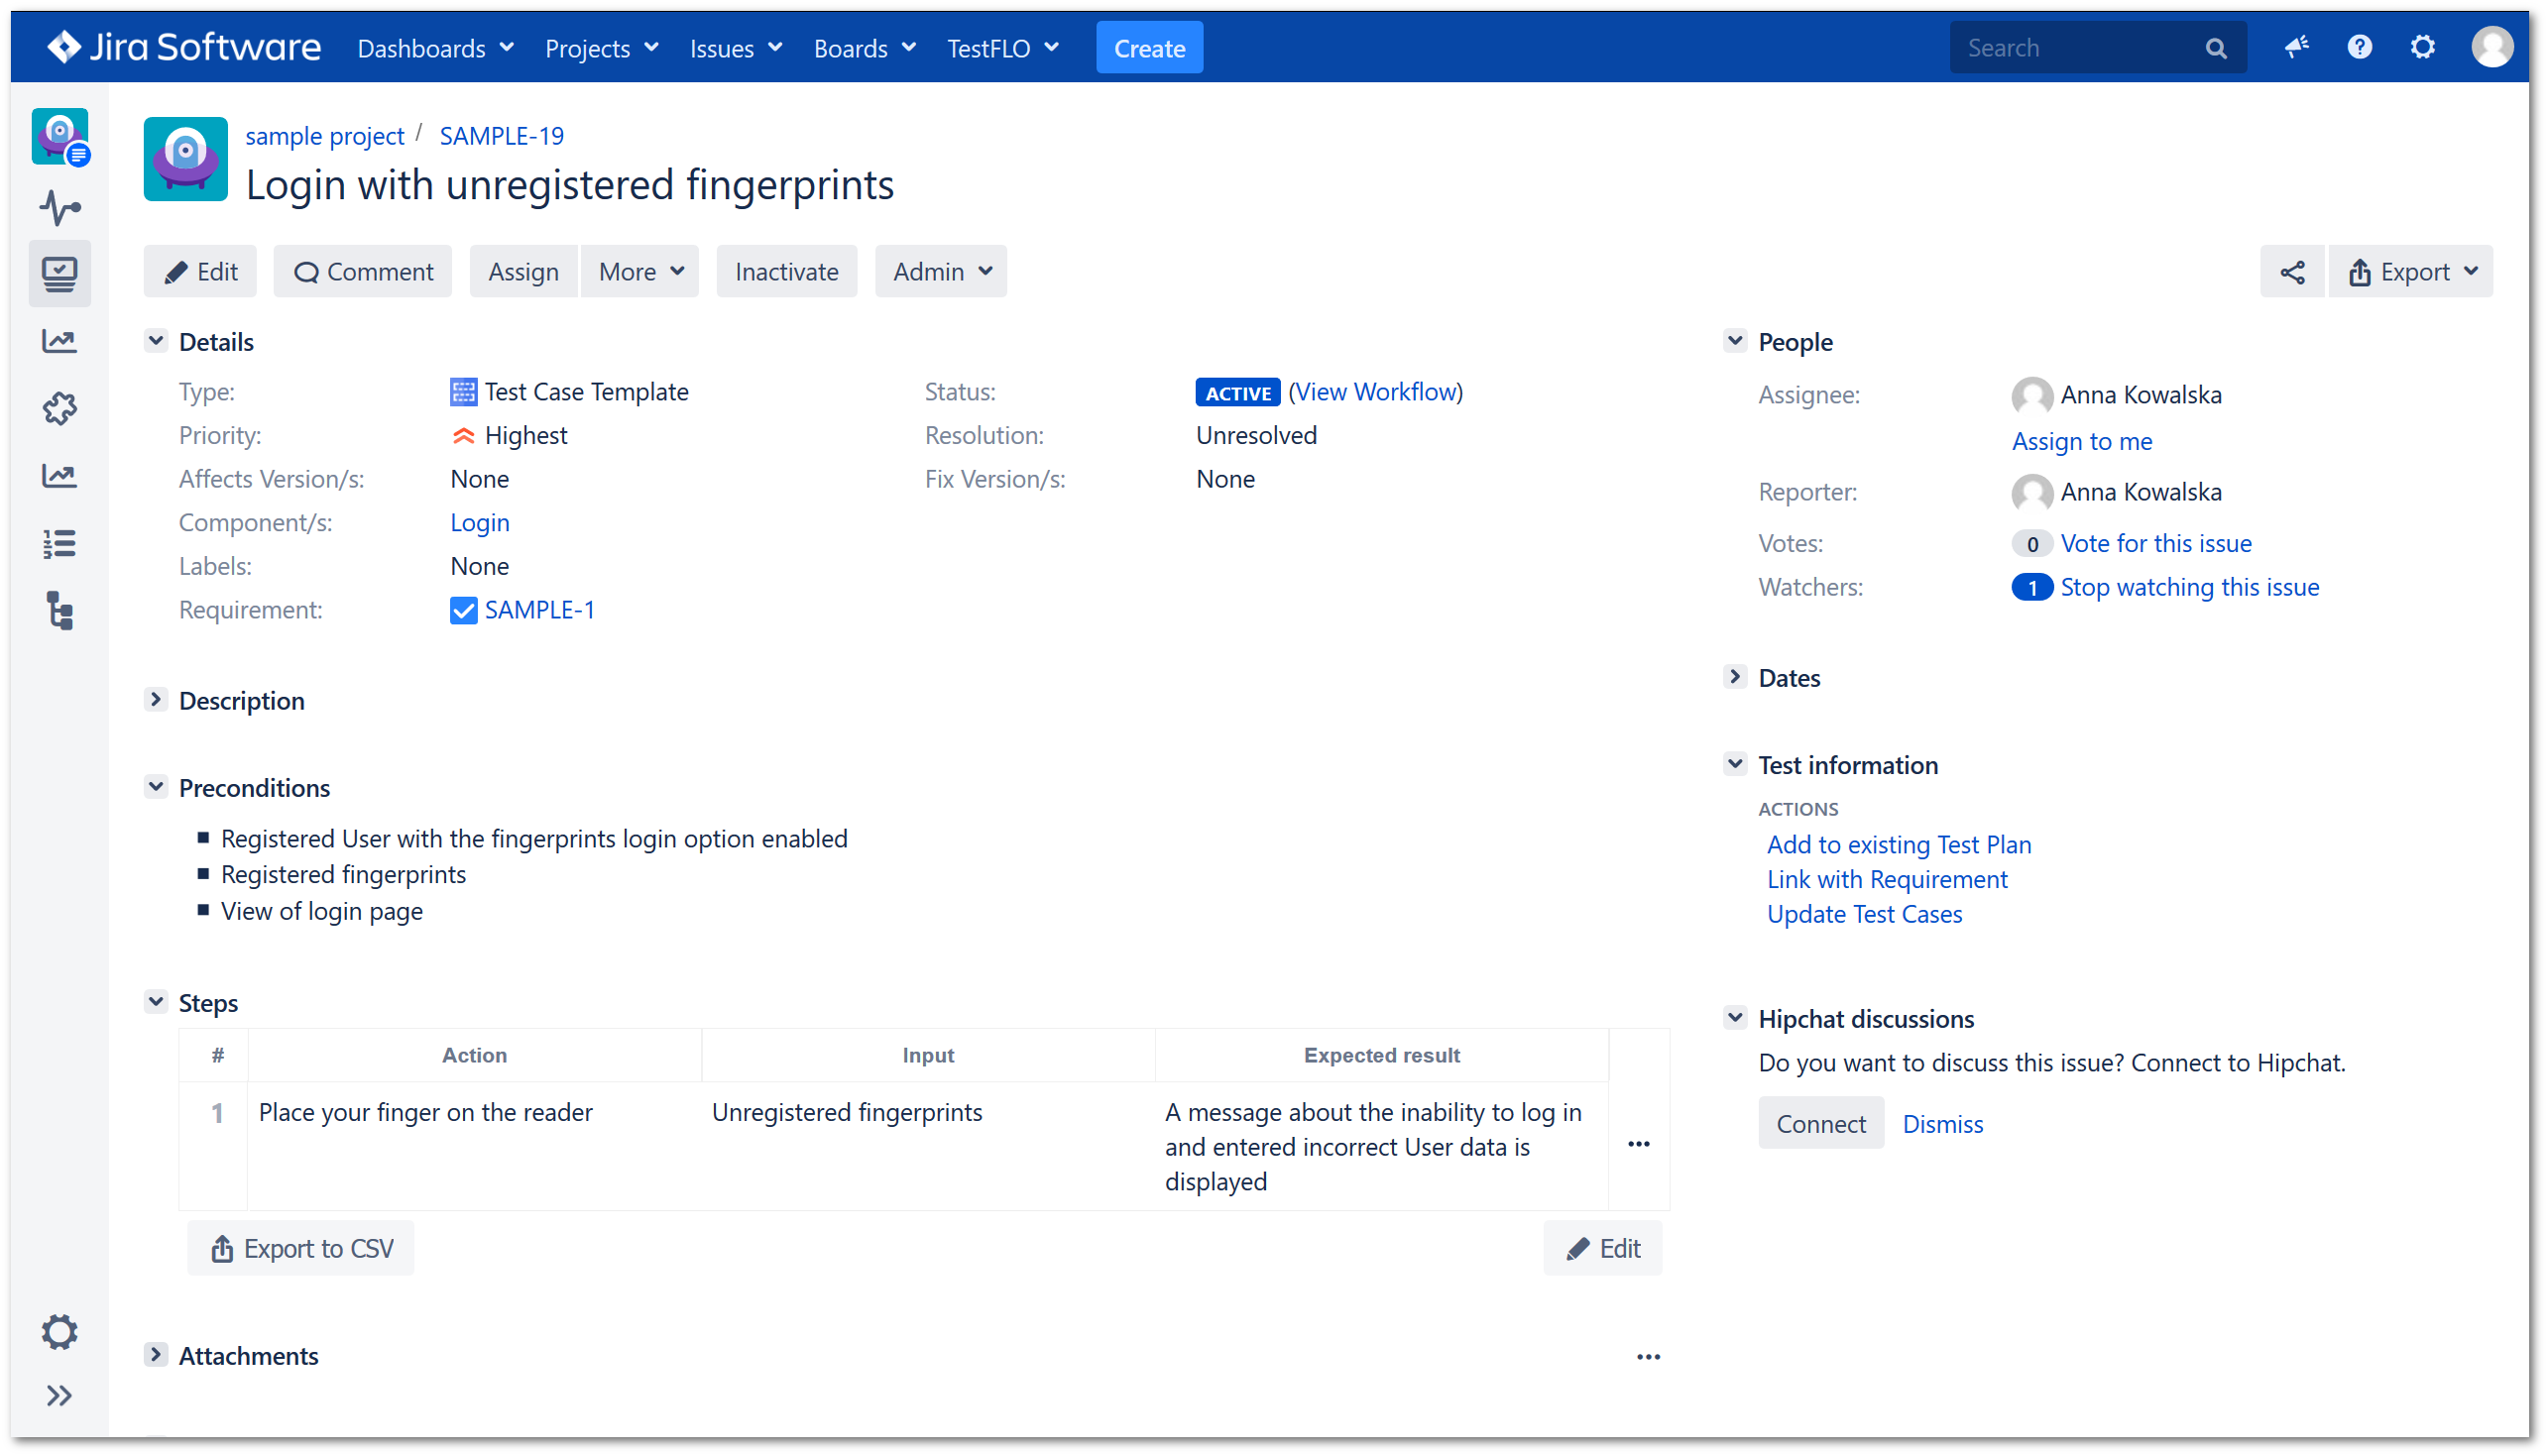 Link with Requirement operation in TestFLO Jira Test Management